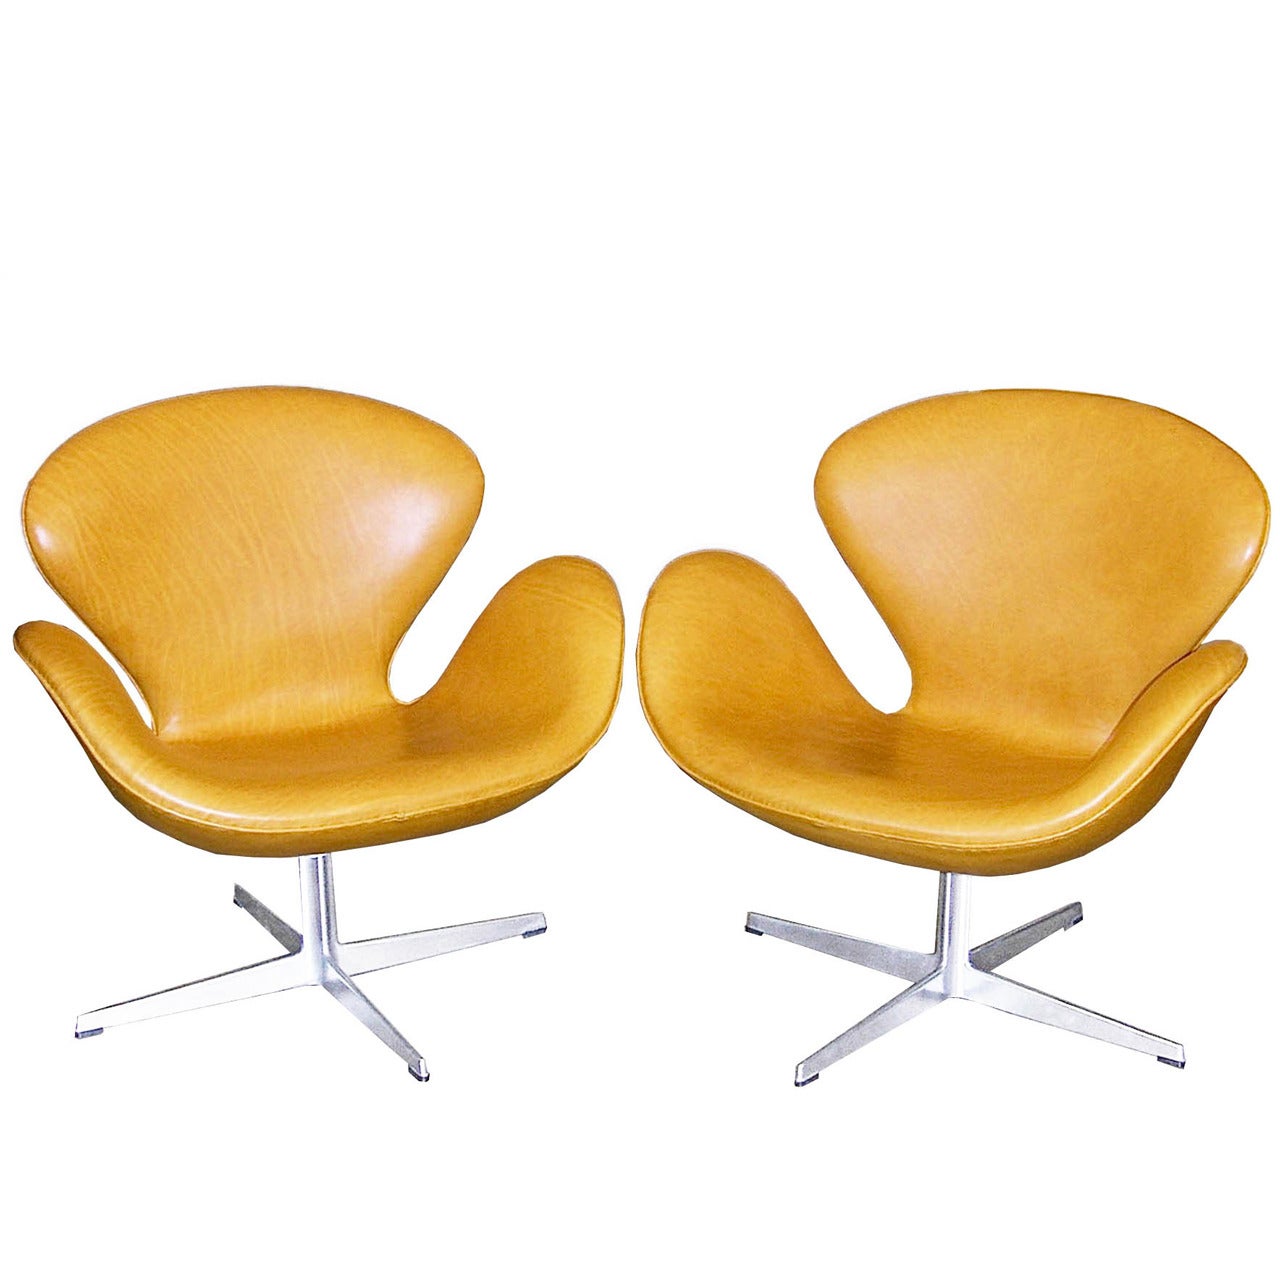 Pair of Original Swan Chairs by Arne Jacobsen for Fritz Hansen For Sale